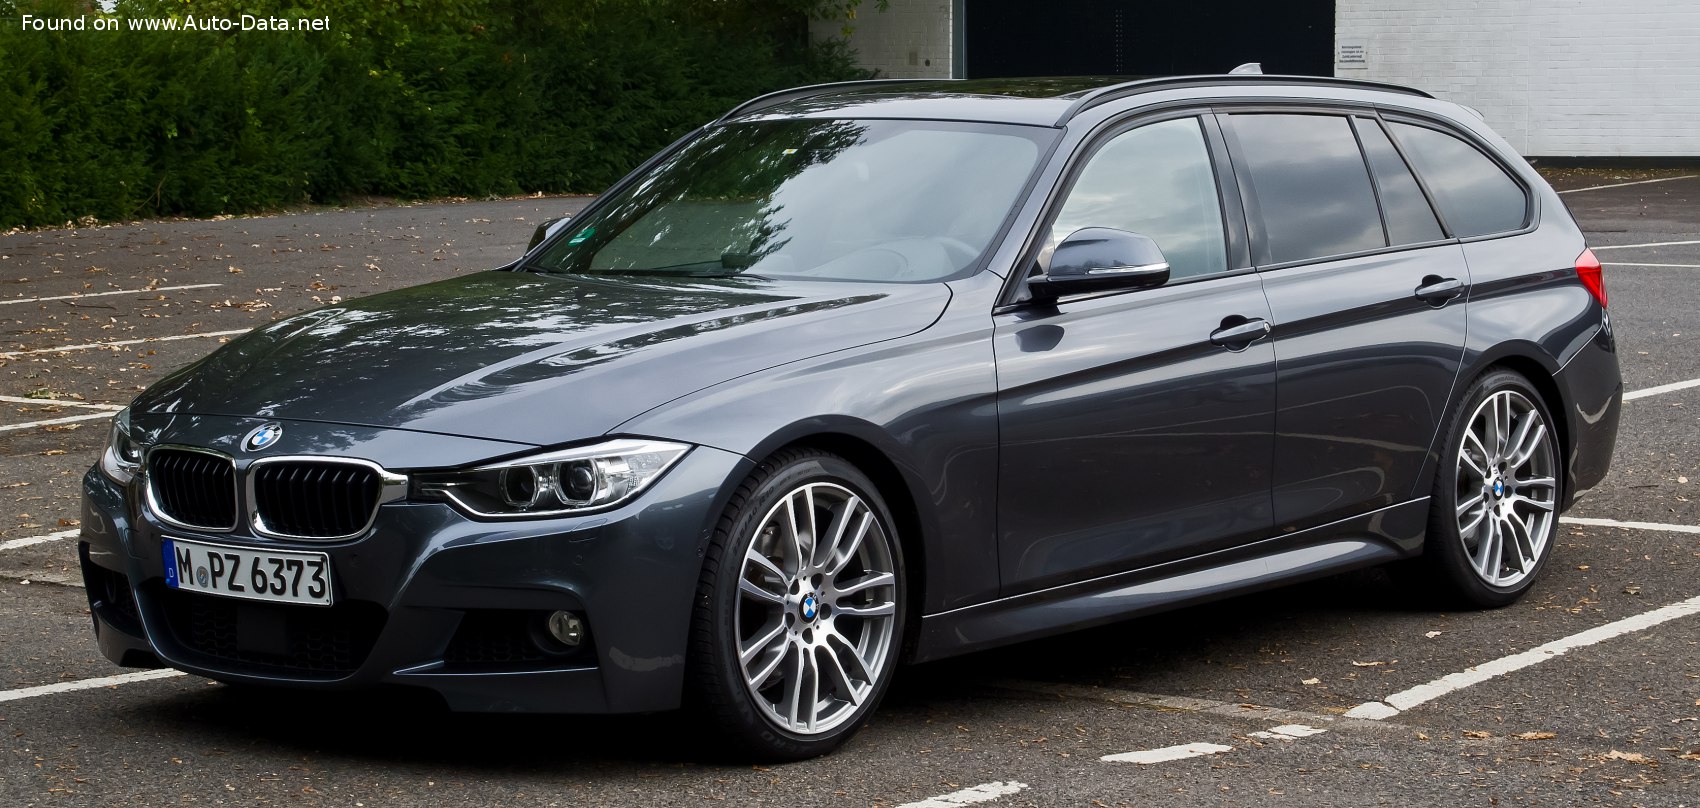 Beknopt nep Middellandse Zee 2013 BMW 3 Series Touring (F31) 320d (184 Hp) xDrive | Technical specs,  data, fuel consumption, Dimensions